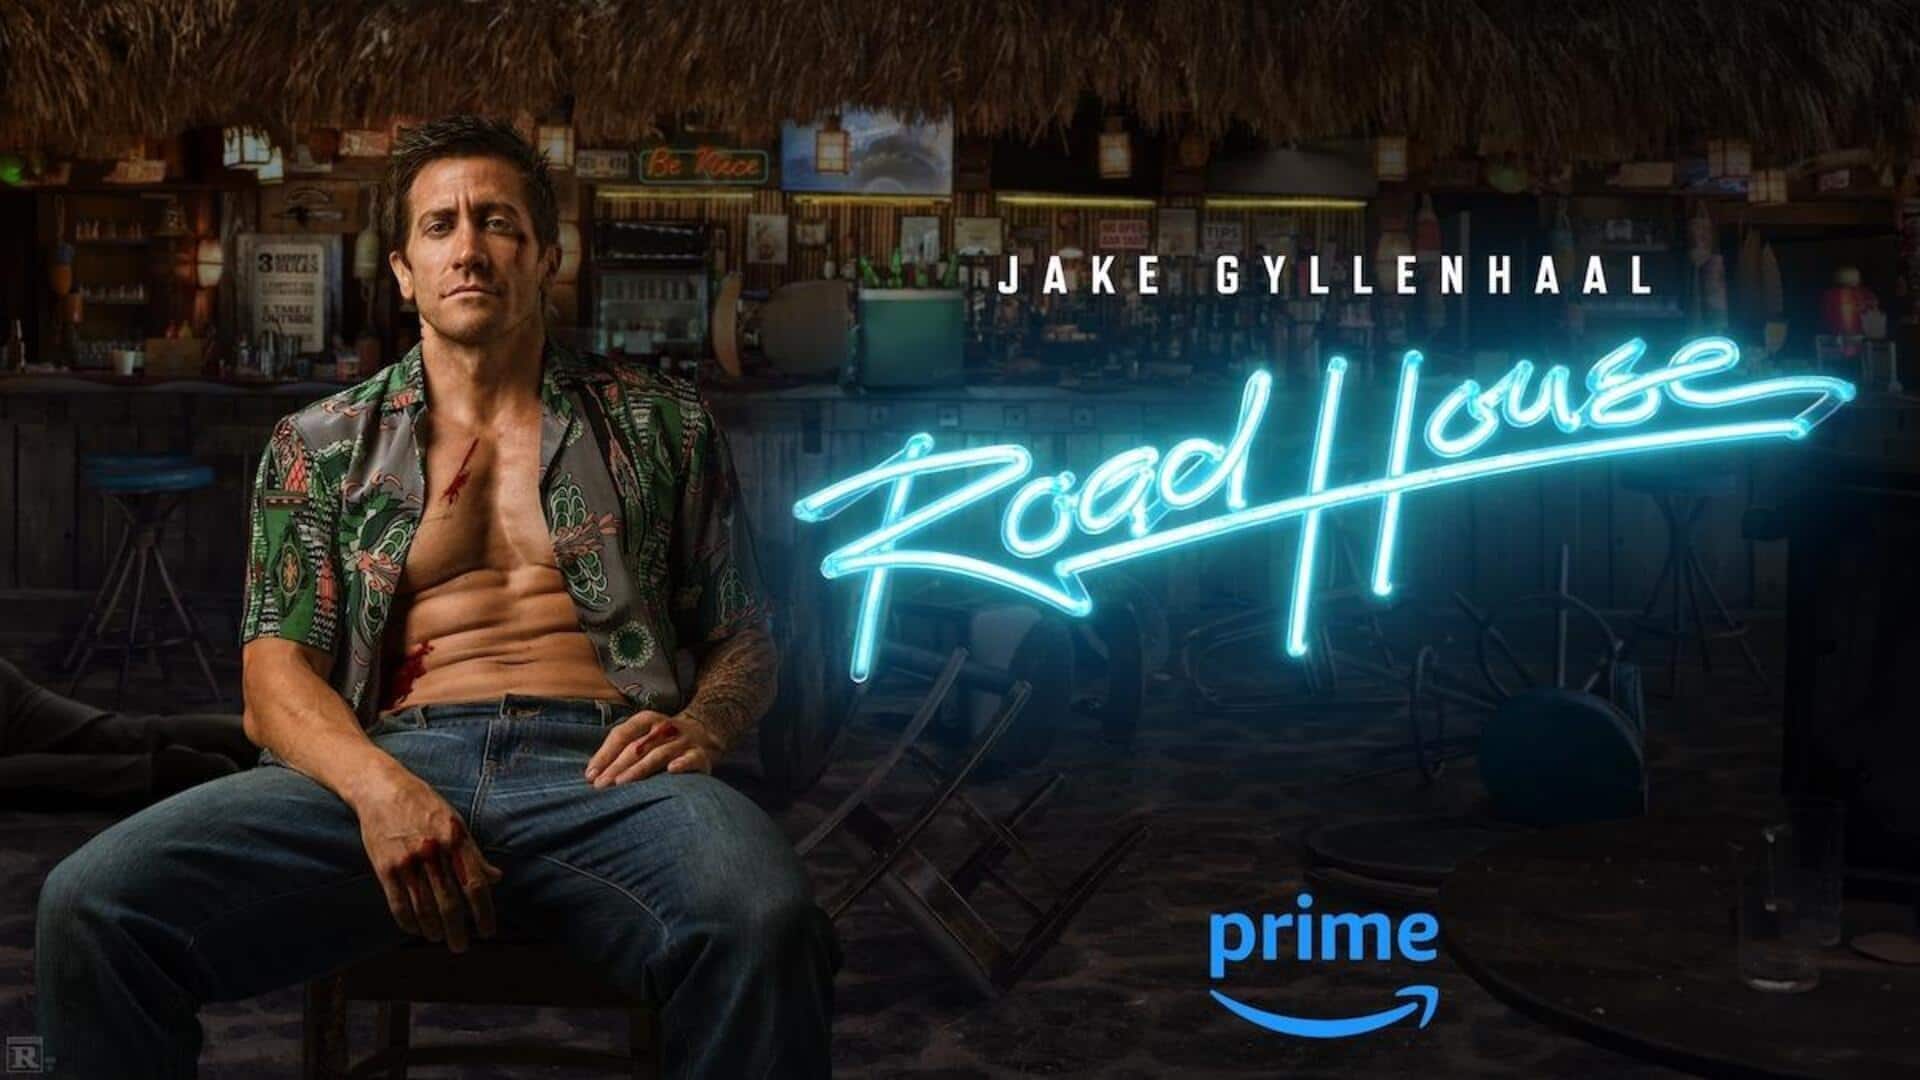 Jake Gyllenhaal's 'Road House' sets streaming records on Amazon Prime